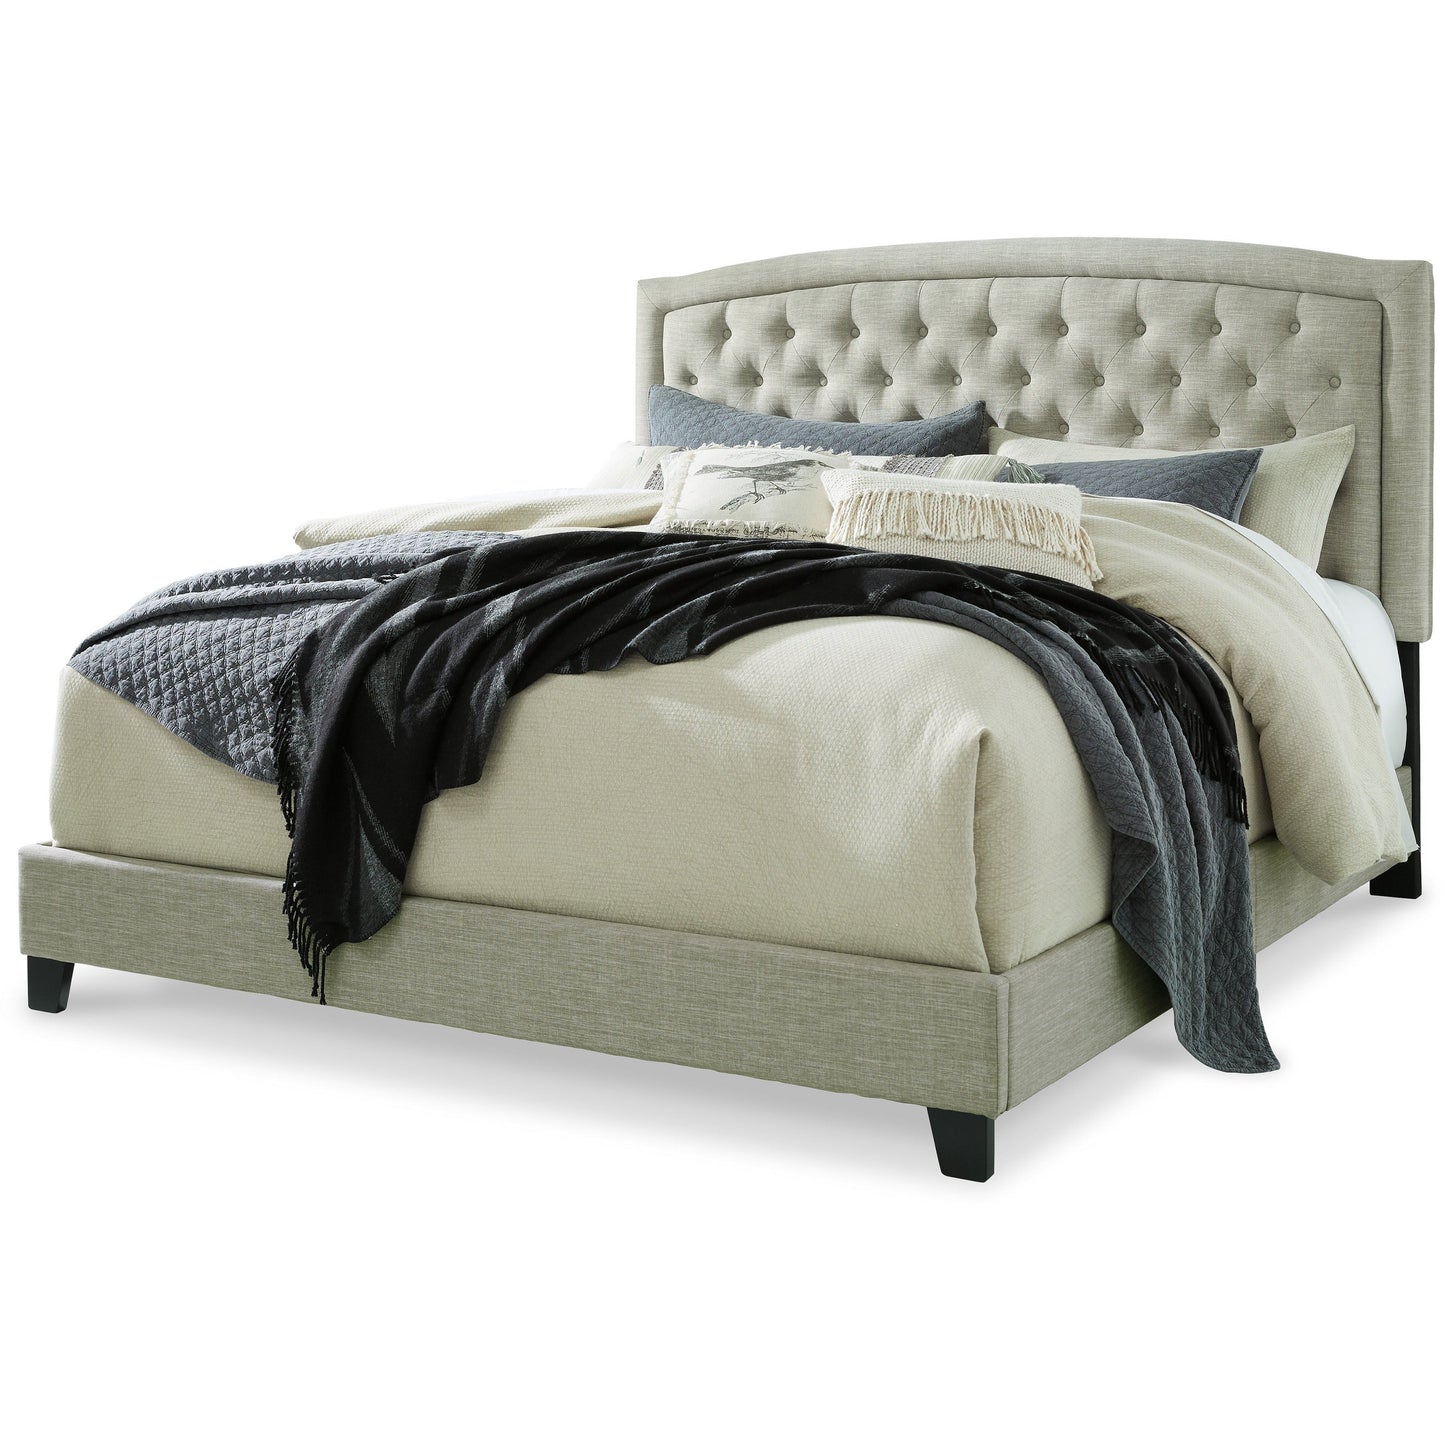 JERARY UPHOLSTERED BED - GRAY